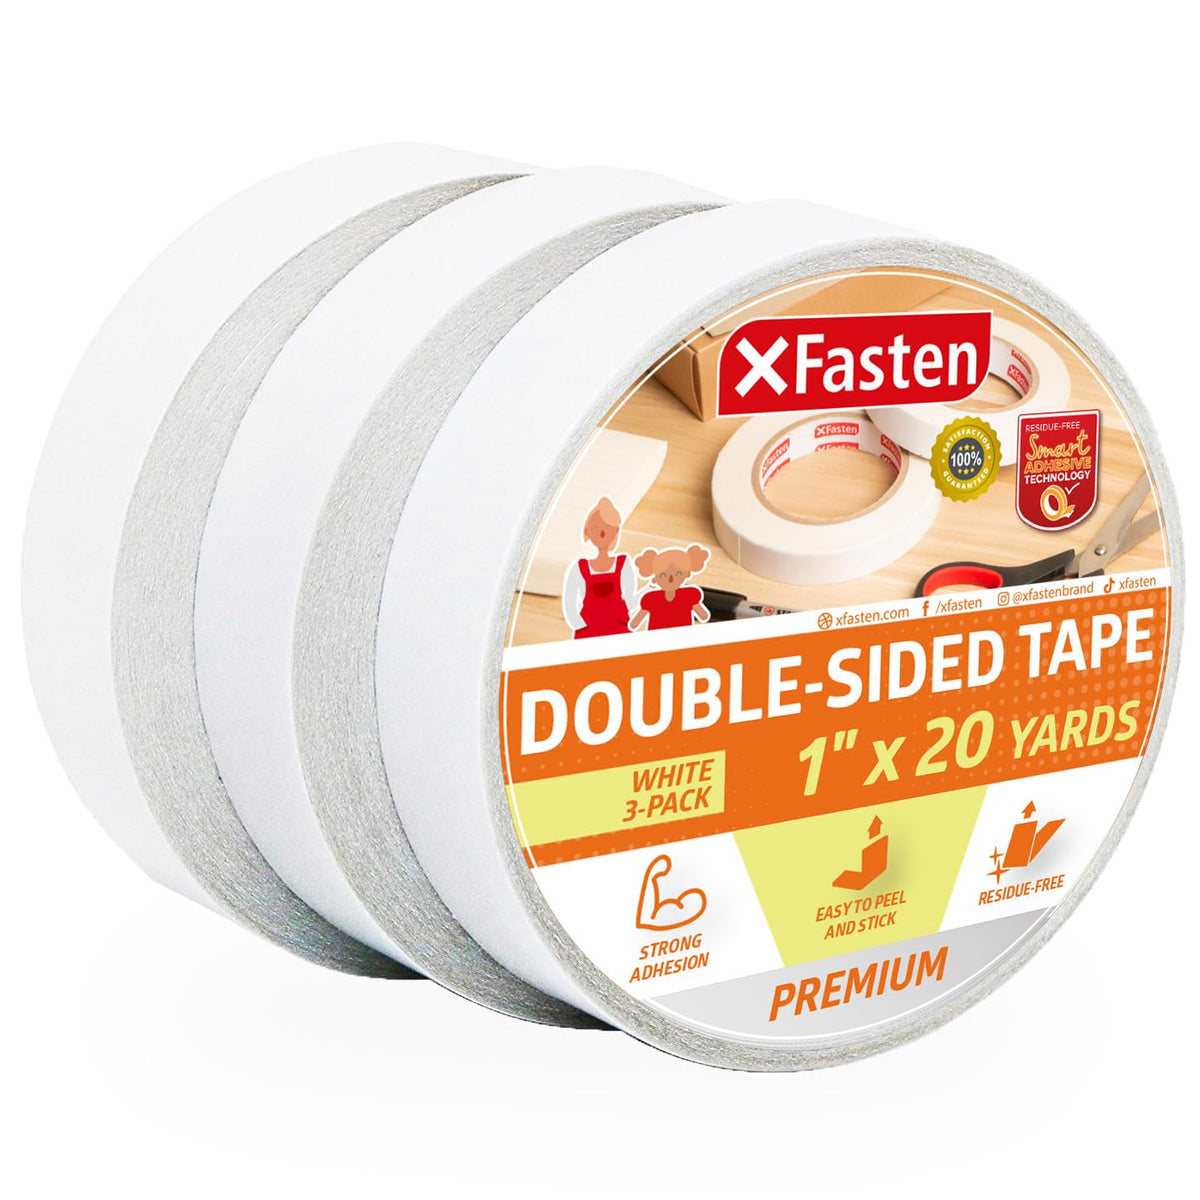 XFasten Double Sided Tape, 1 Inch x 20 Yards, White